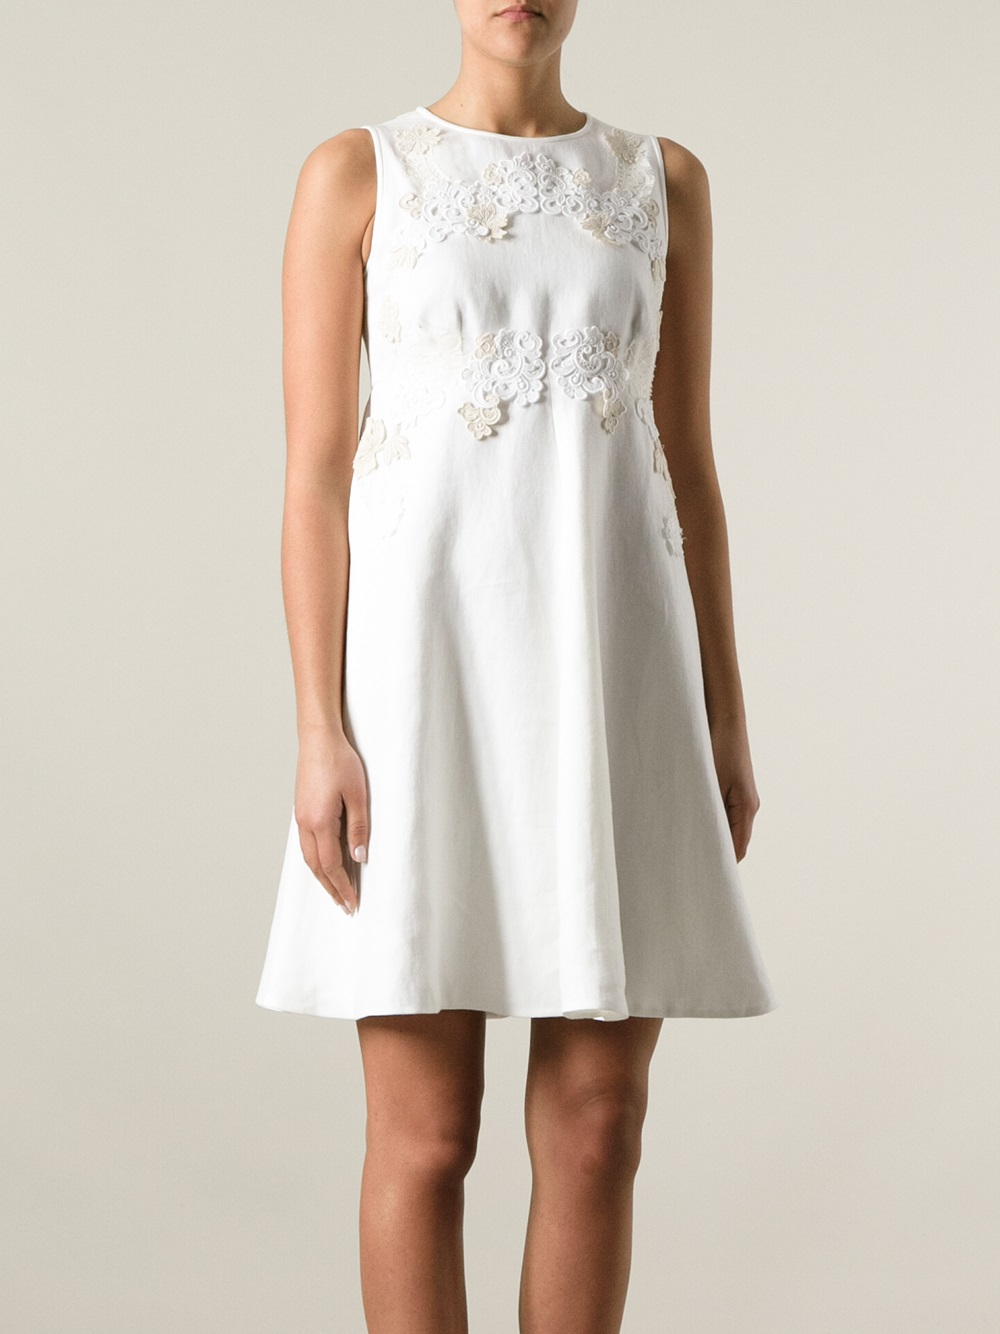 Lyst - Dolce & gabbana Lace Appliqued Dress in White